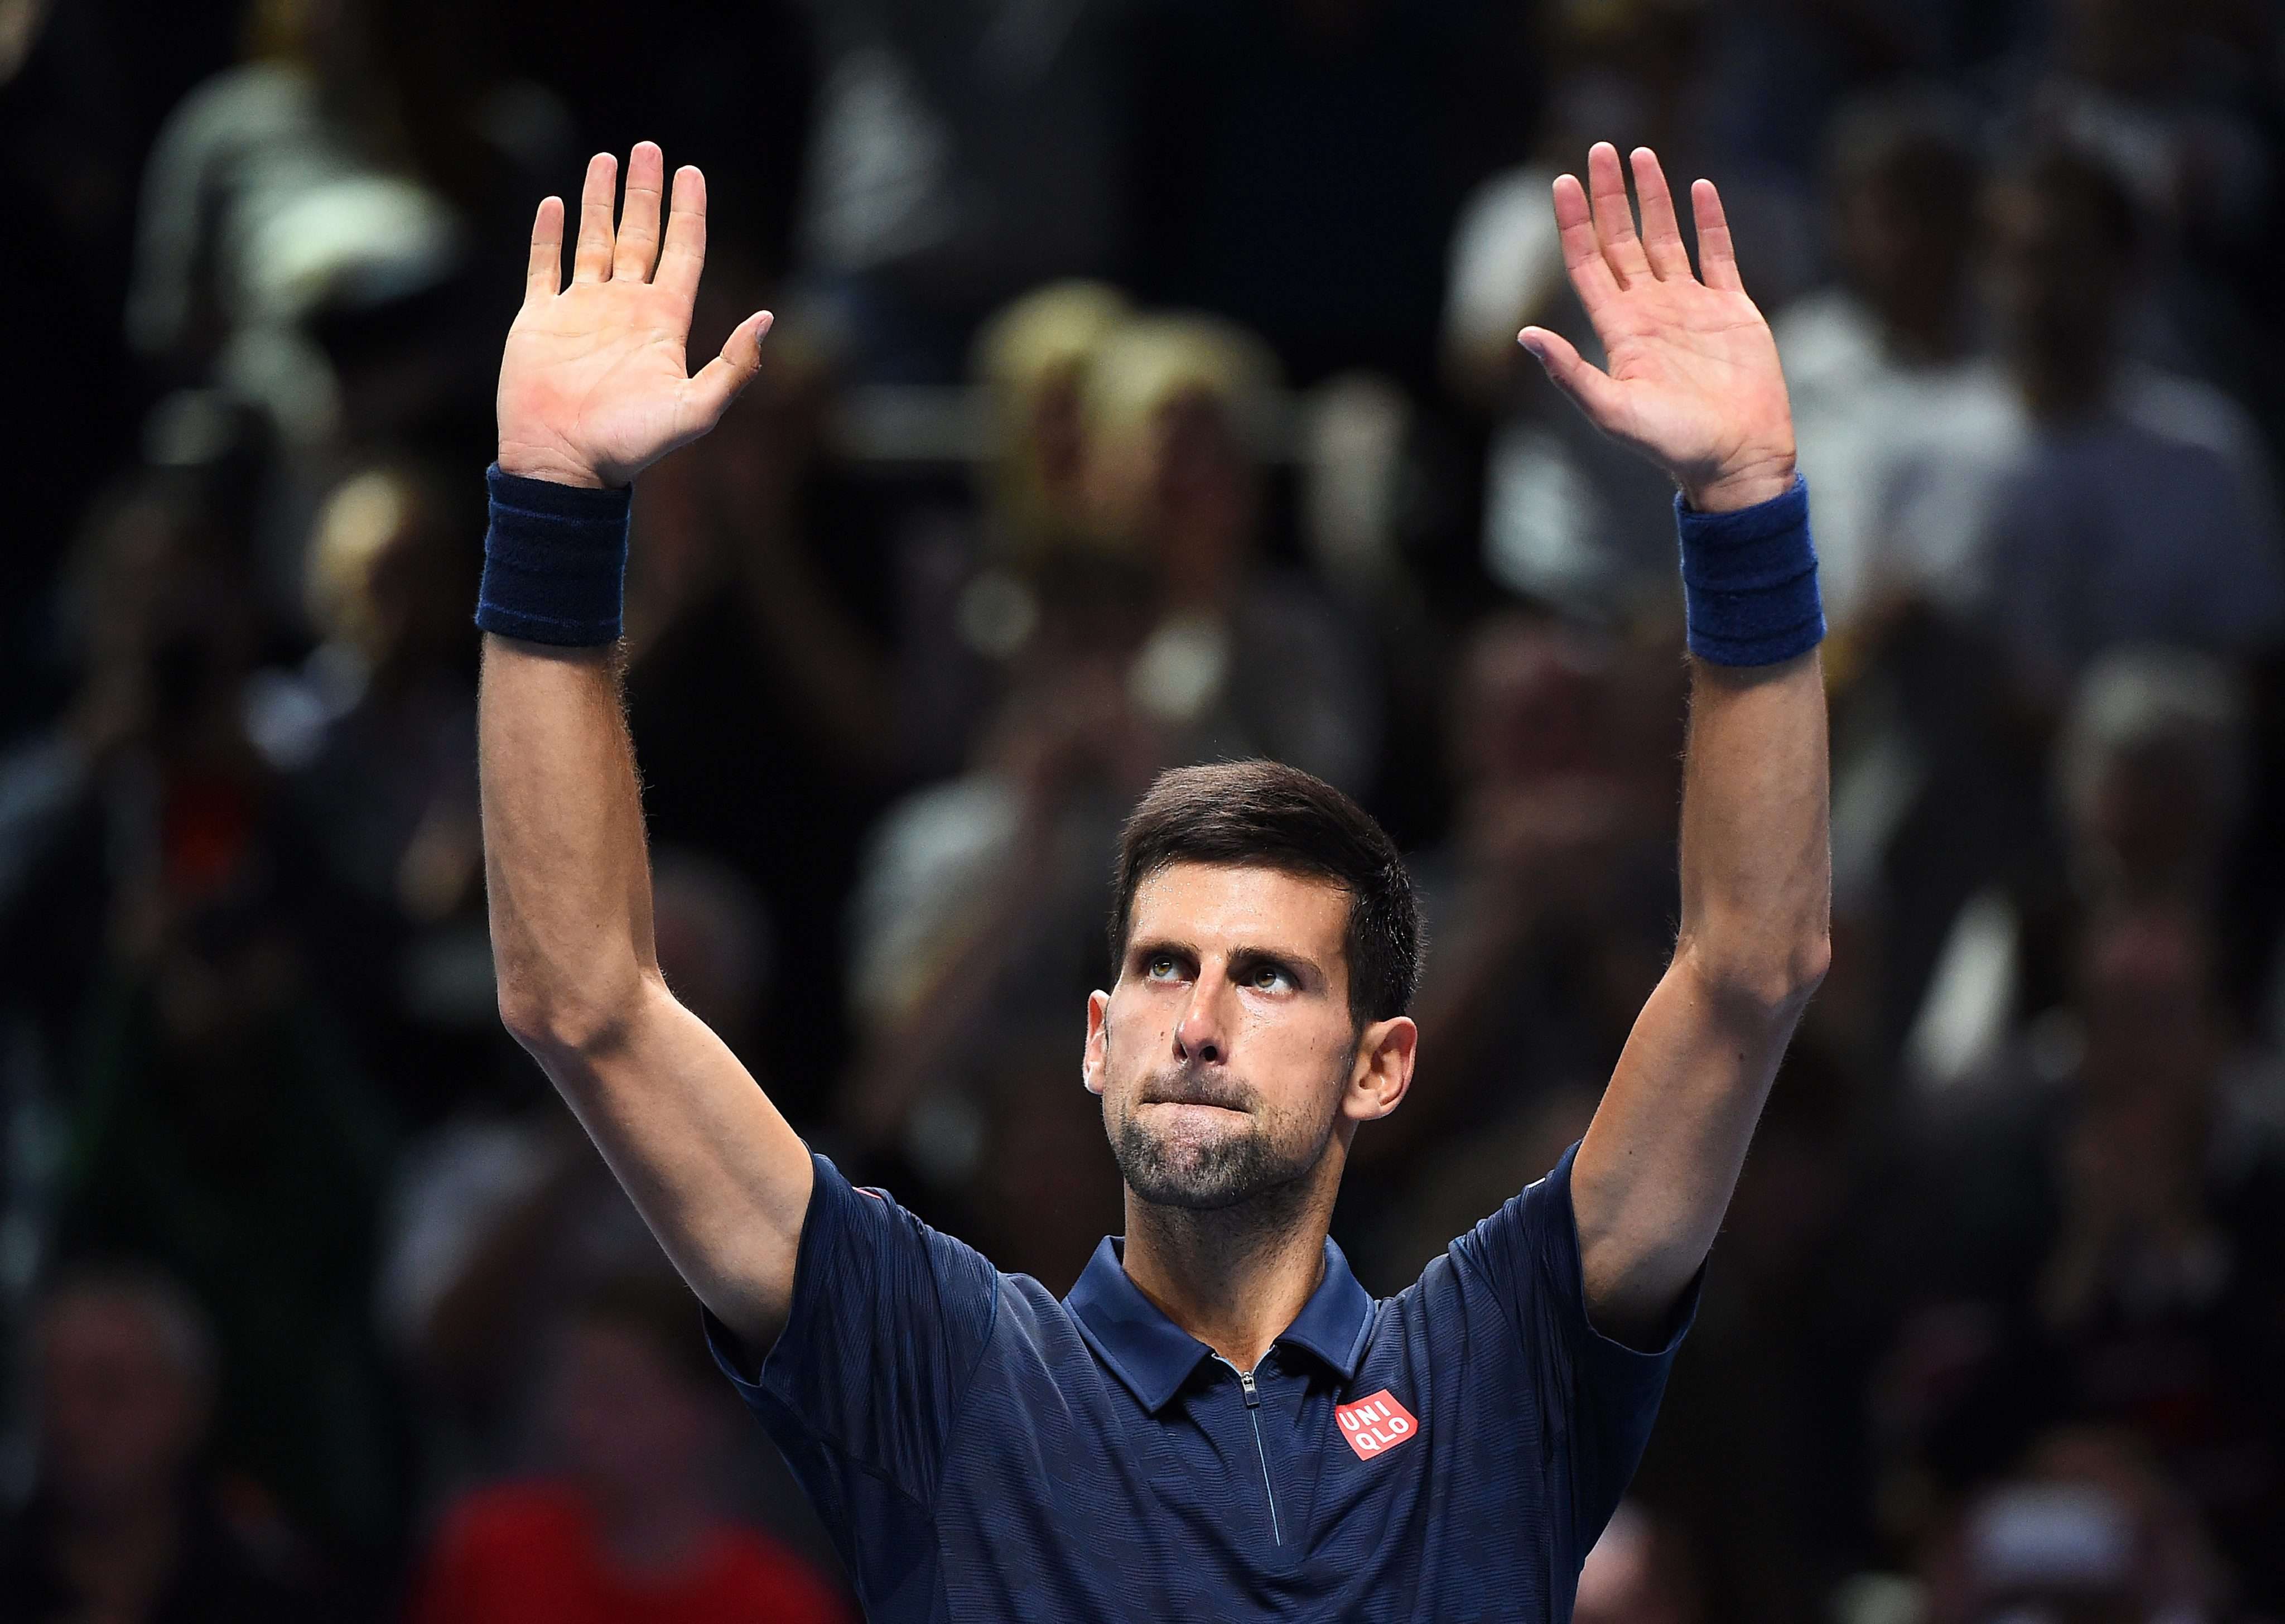 Serbian Novak Djokovic celebrates after defeating Austria’s Dominic Thiem in their singles group match at the ATP World Tour Finals in London. Photo: EPA